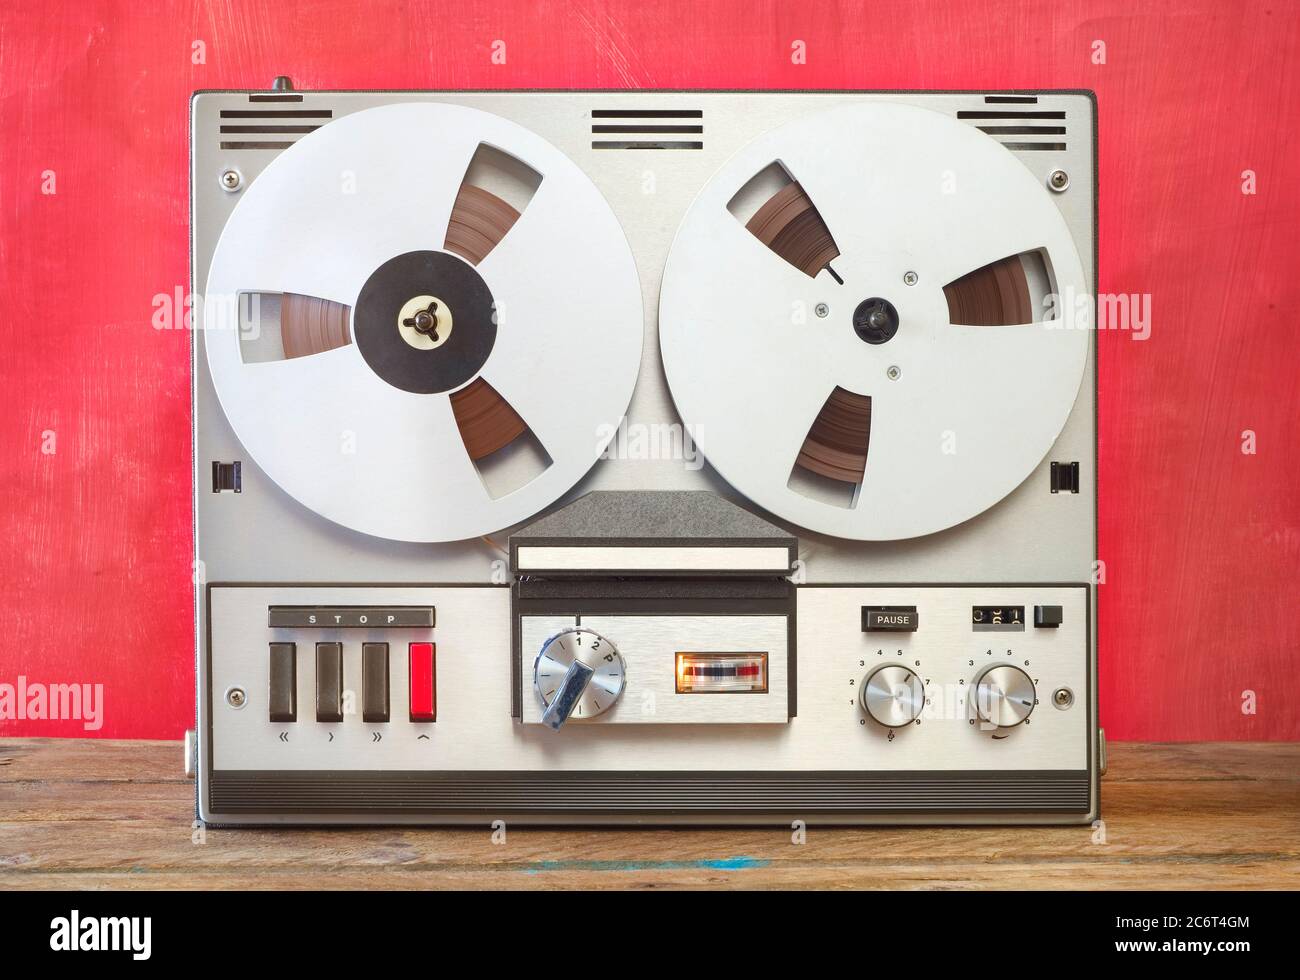 https://c8.alamy.com/comp/2C6T4GM/vintage-analog-open-reel-to-reel-tape-recorder-dated-from-the-sixties-in-good-working-condition-2C6T4GM.jpg